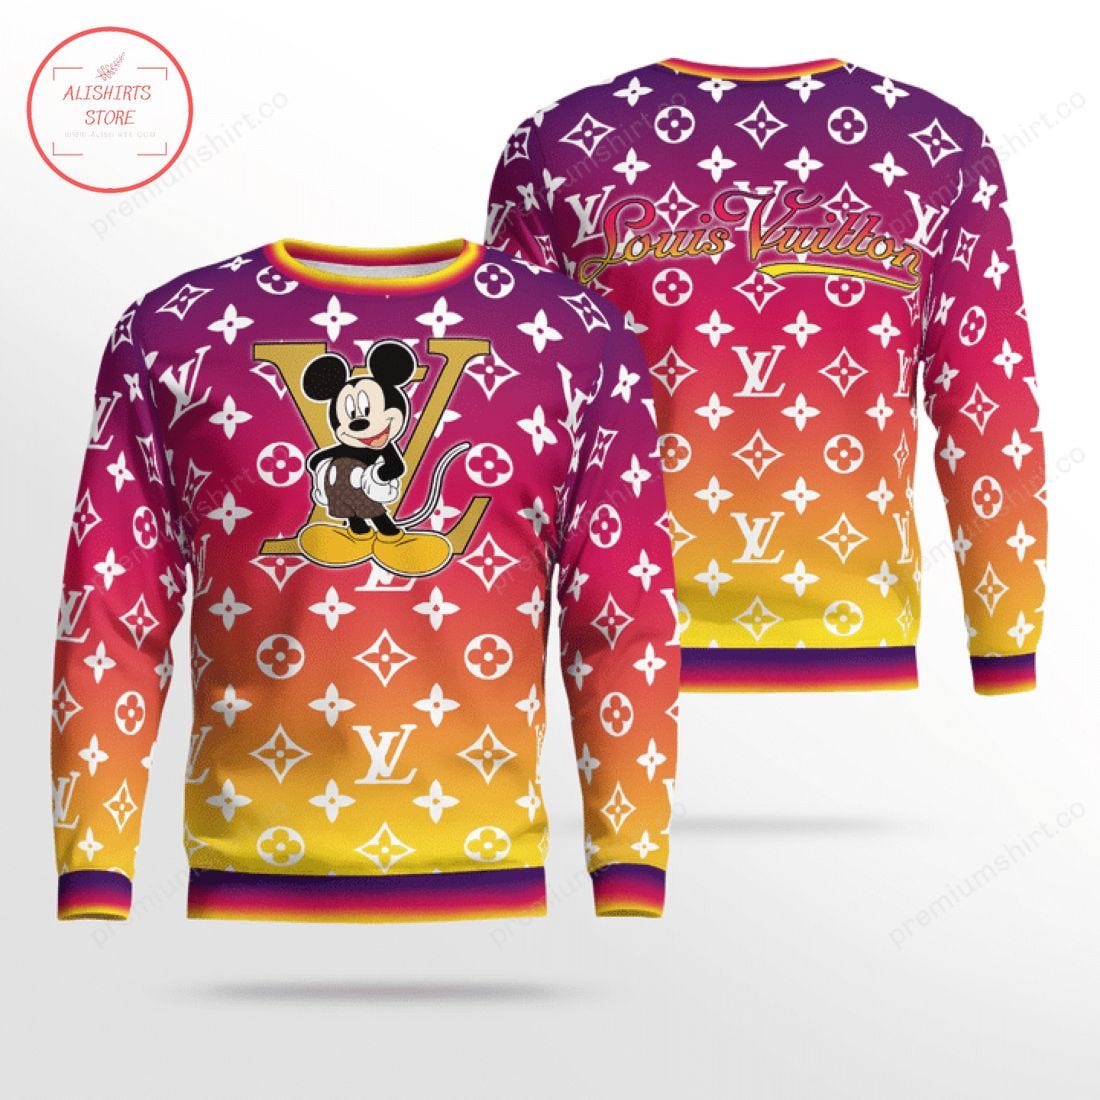 NICE) Louis Vuitton Mickey Mouse 3D Ugly Sweater S2 - Hothot